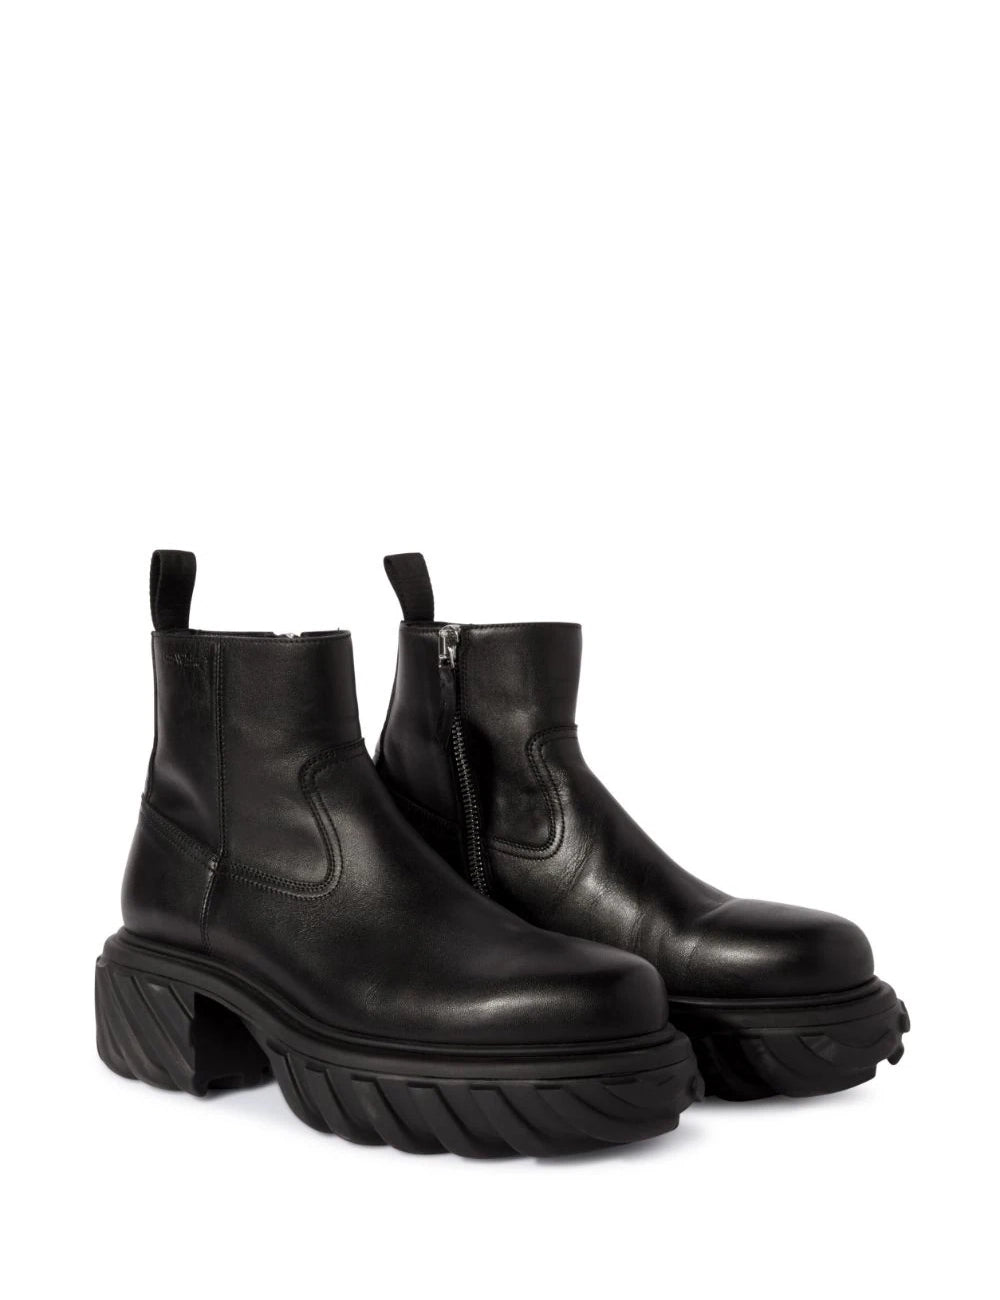 OFF WHITE EXPLORATION MOTOR ANKLE BOOT